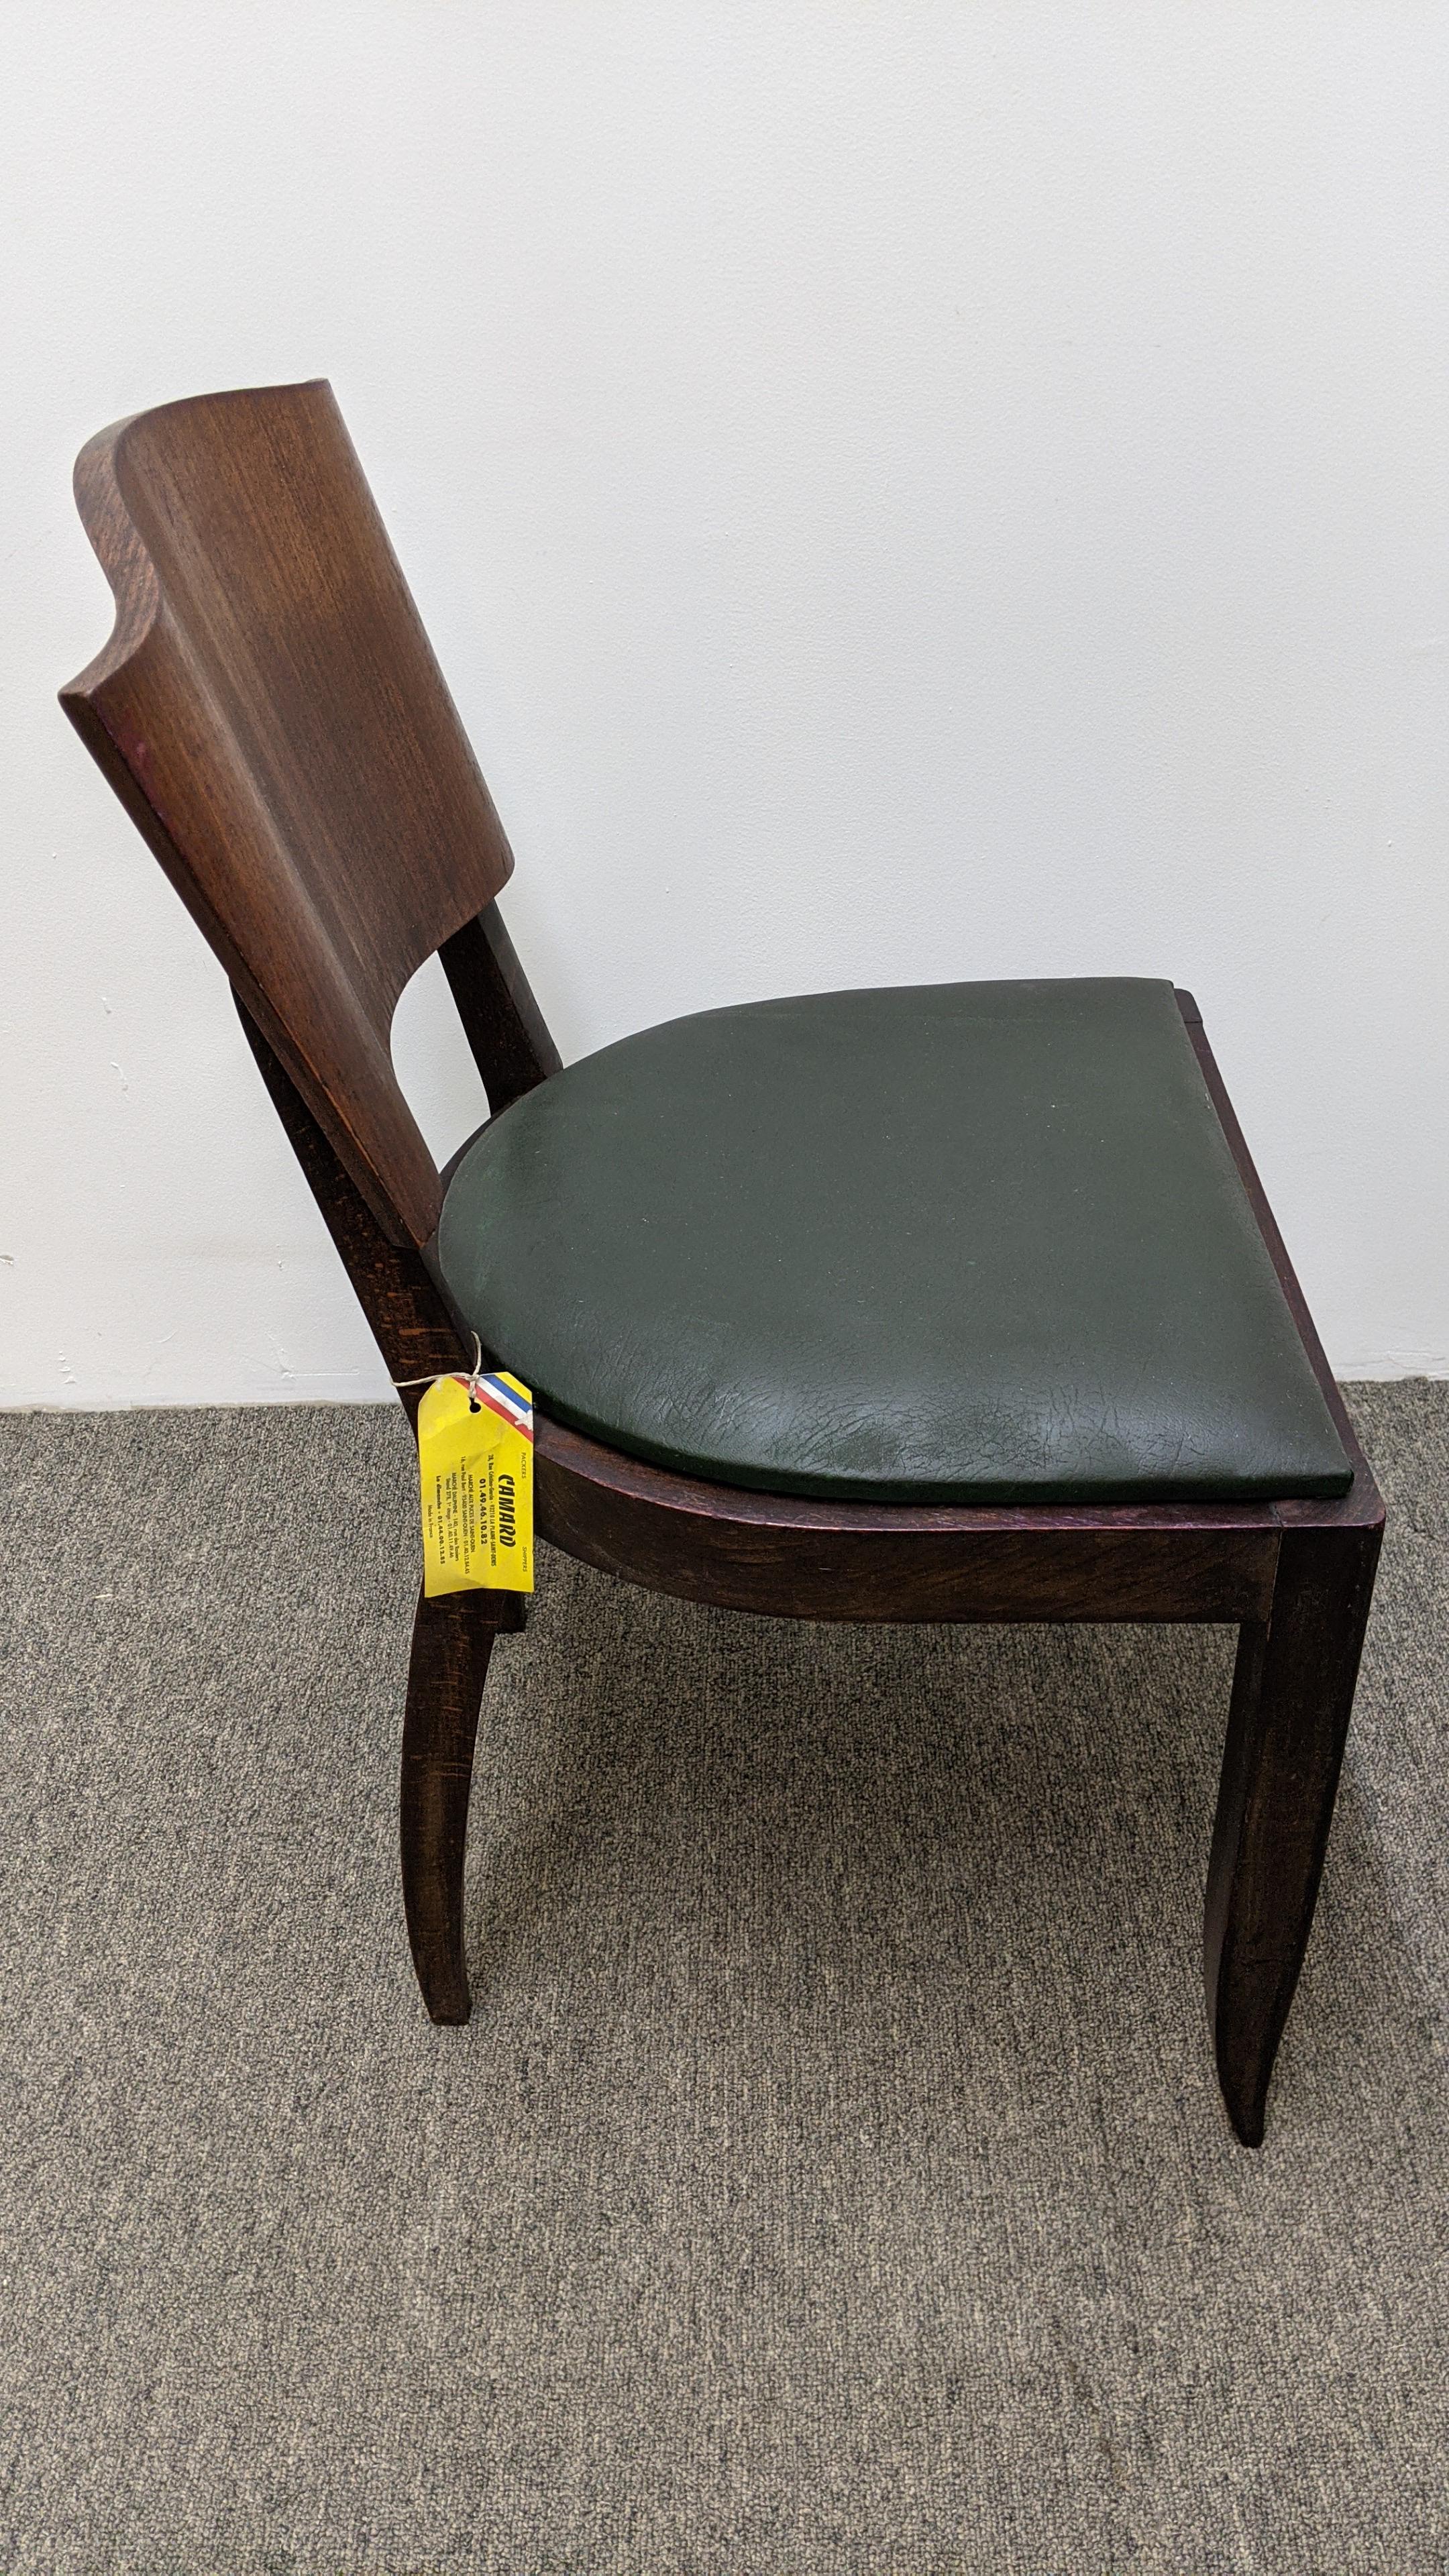 These French Art Deco chairs are a set of six from 1930s. They are part of a complete dining room set. The chairs feature saber front legs and splay rear legs with a unique wave shape backrest design in Brazilian mahogany. They need to be refinished